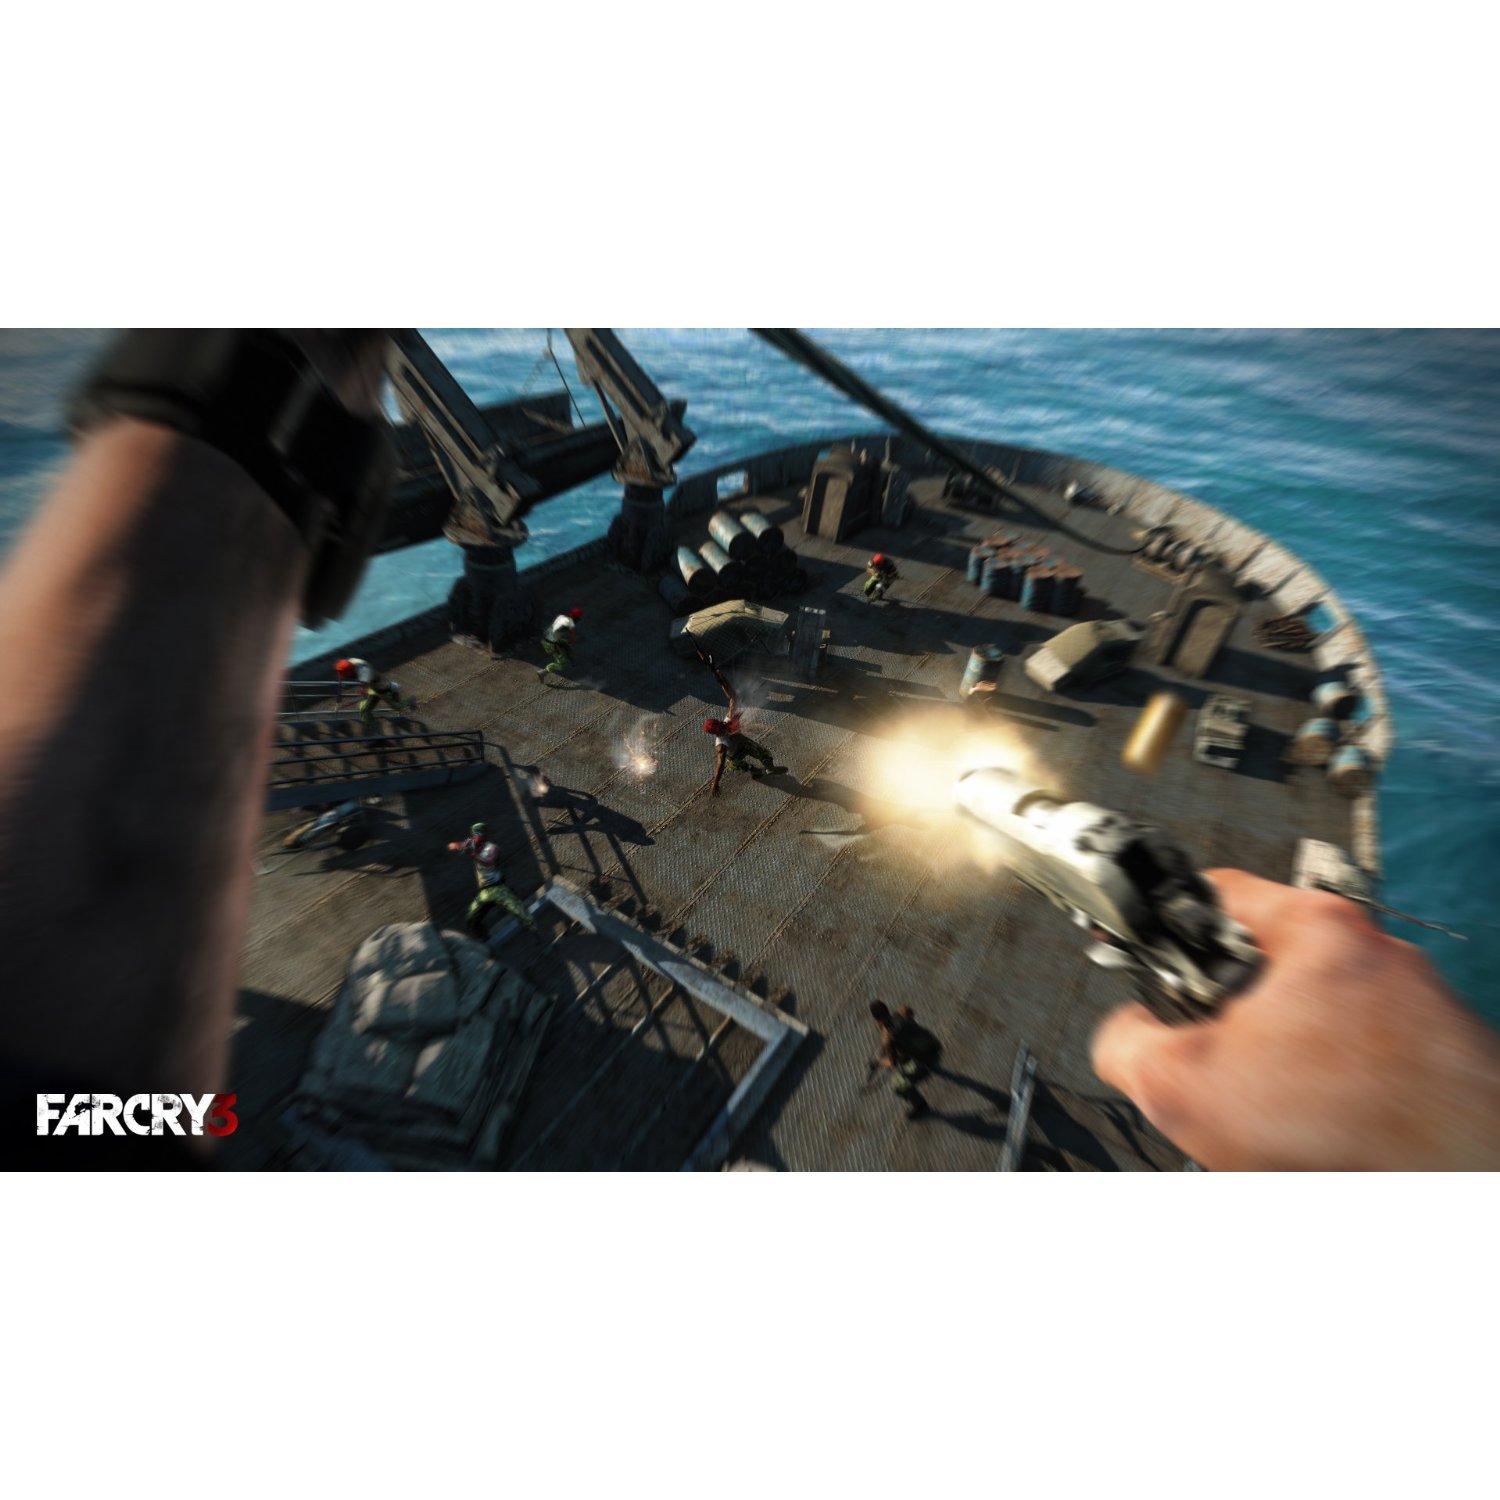 http://thetechjournal.com/wp-content/uploads/images/1203/1332755430-far-cry-3--game-for-pc-5.jpg